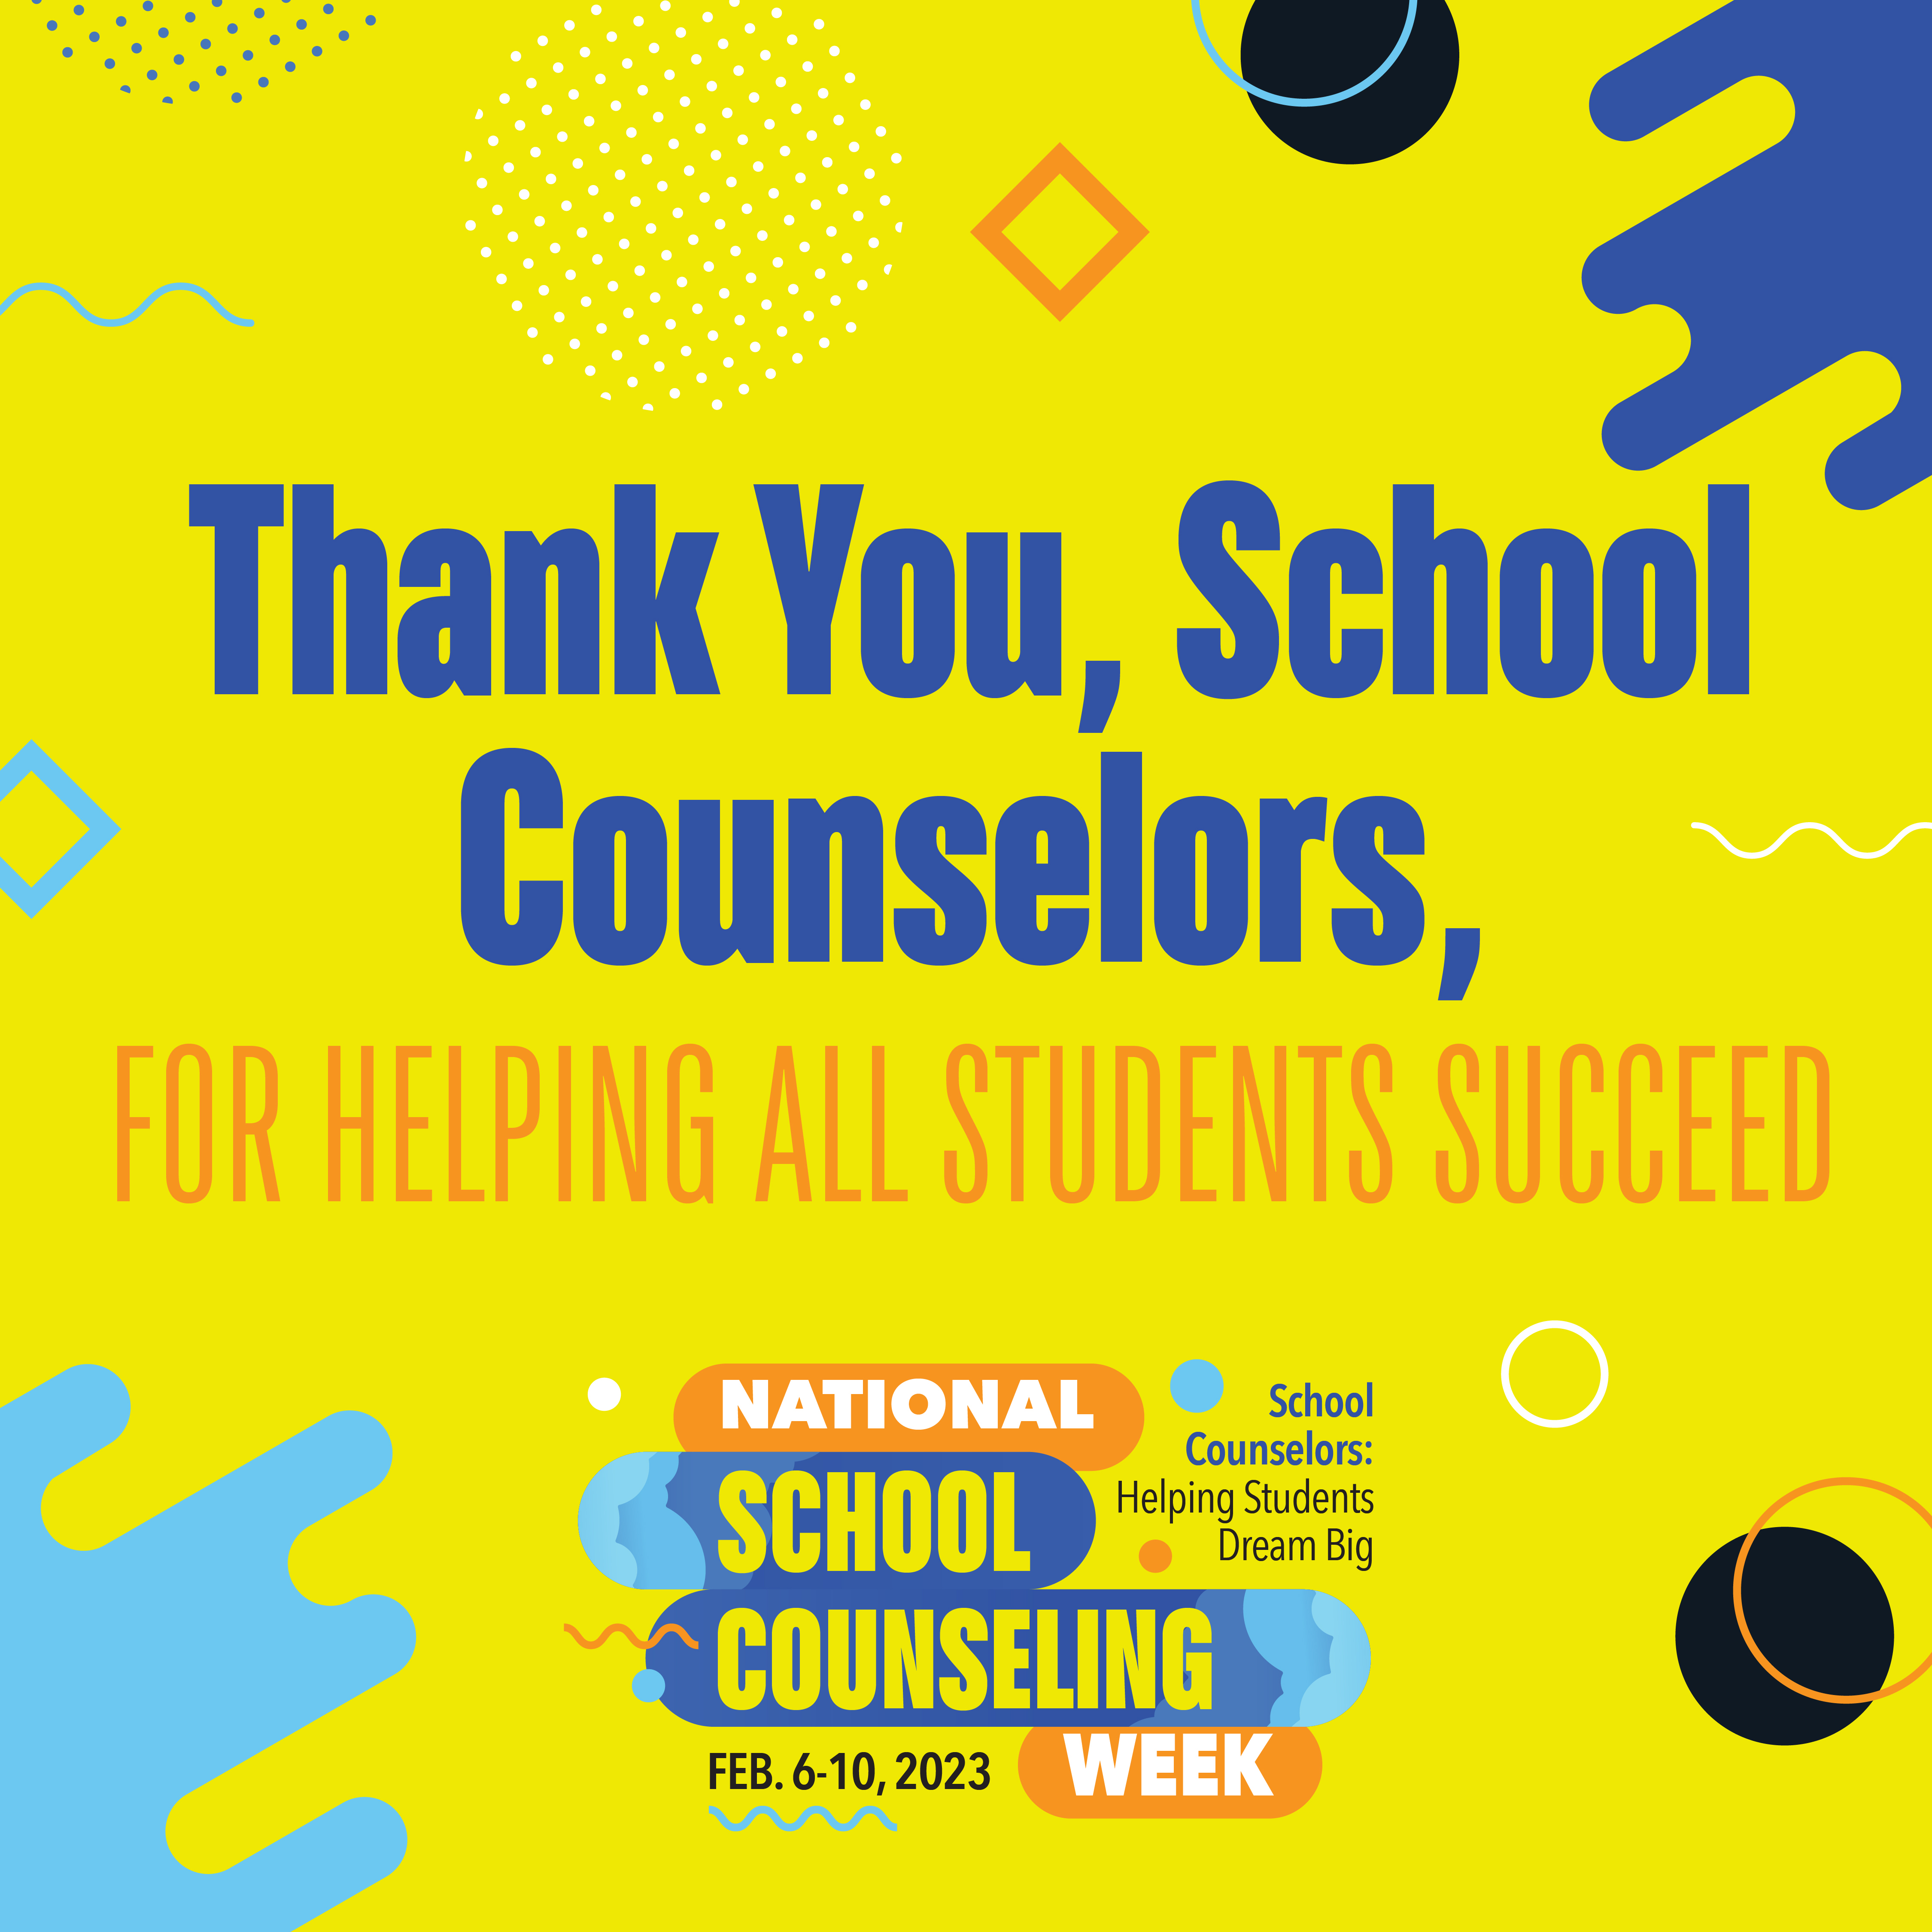 Thank you to school counselors